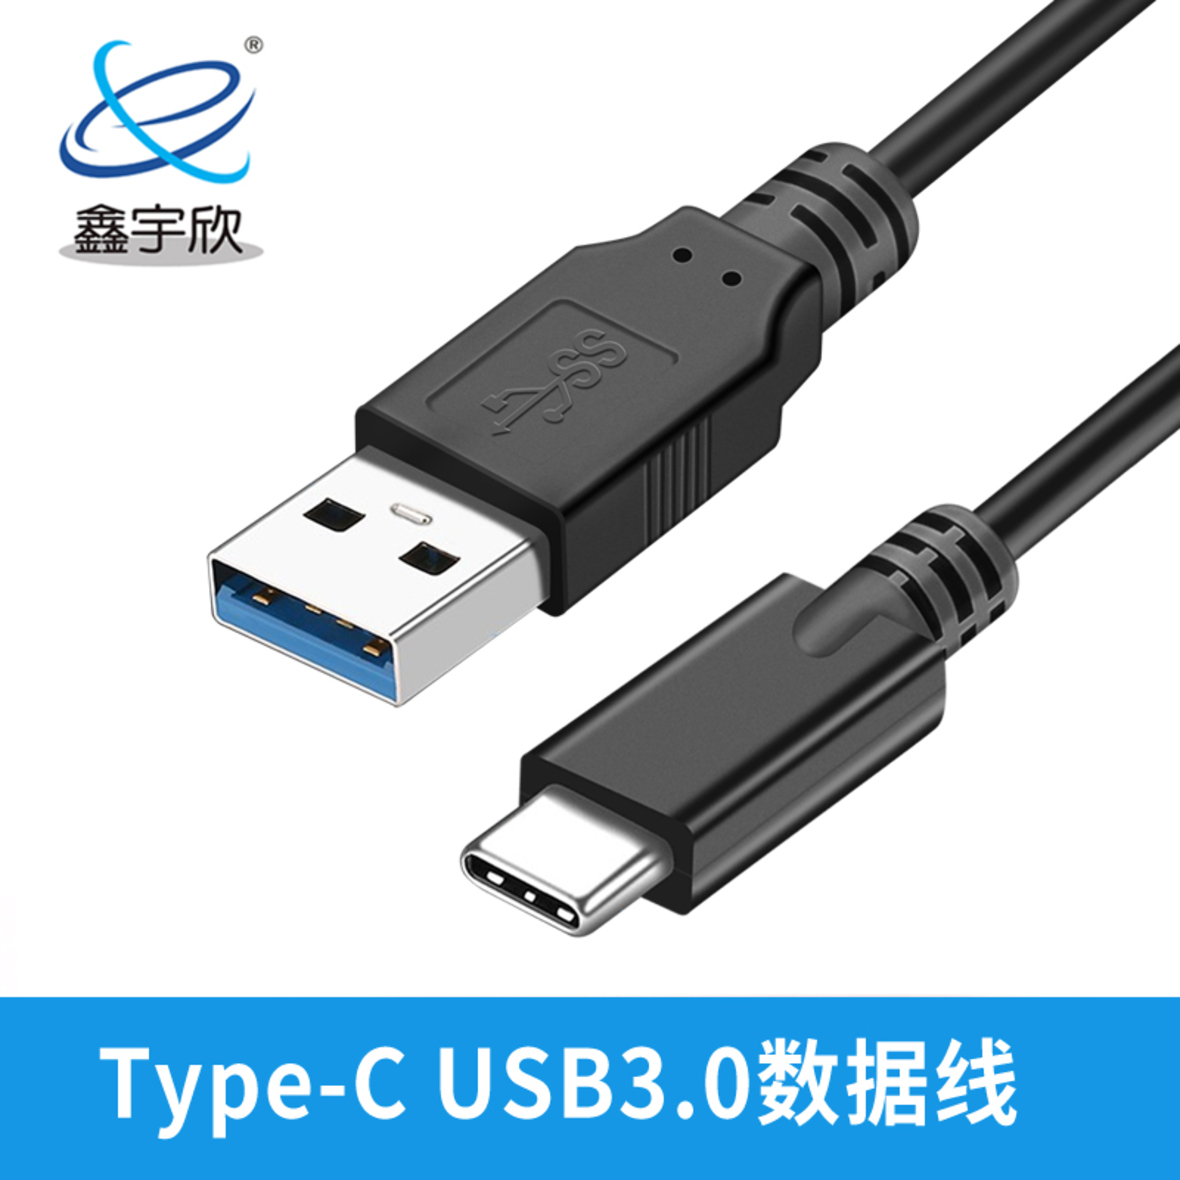  Type-c USB3.0 data cable 3A current 10Gbps high-speed transmission